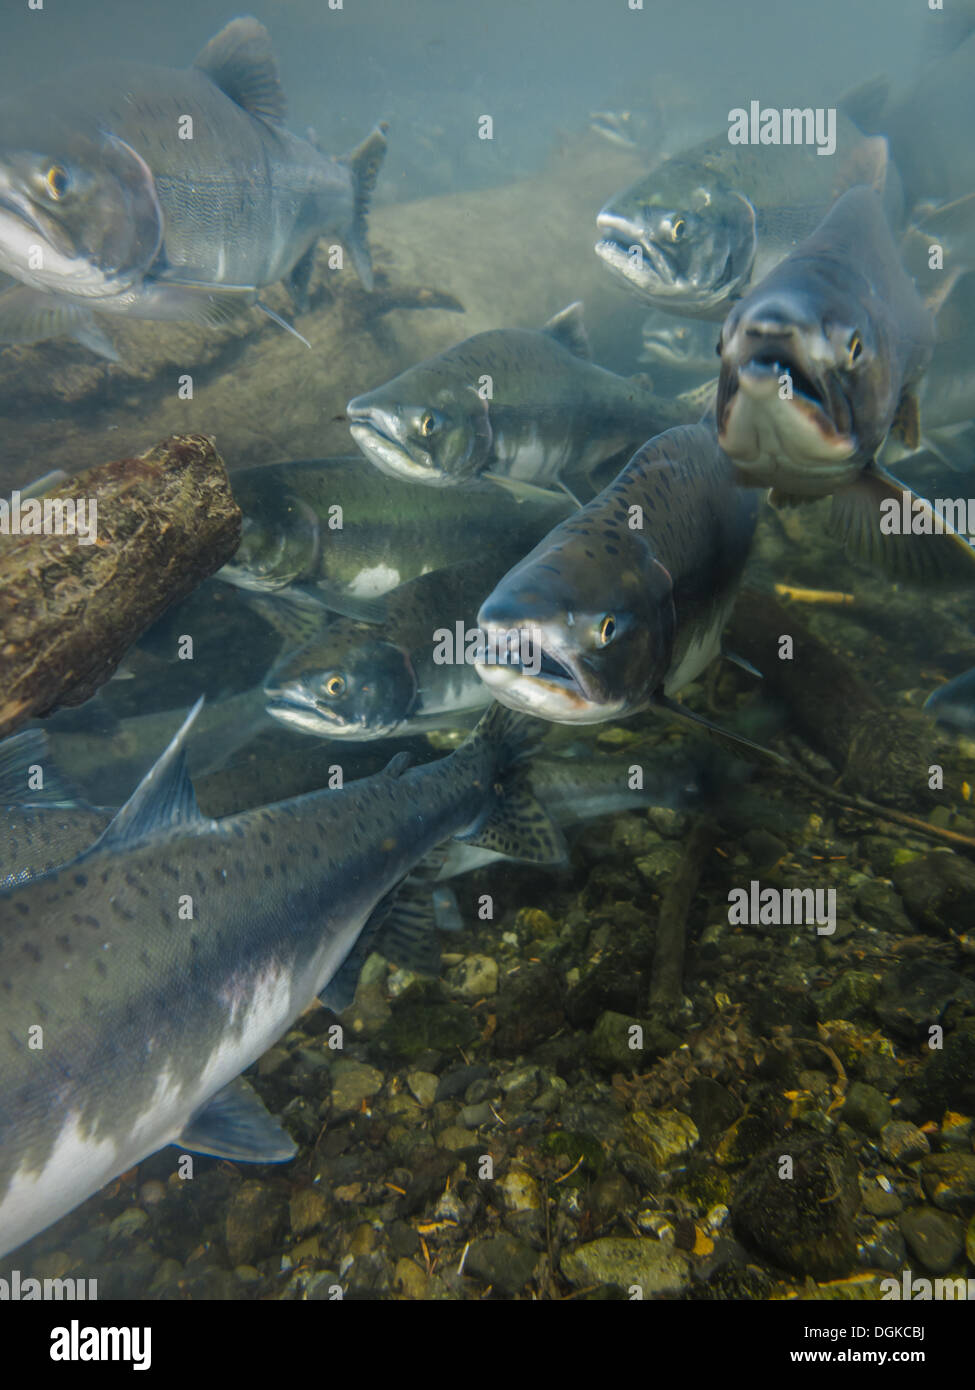 underwater view mouth open heads of sockeye salmon spawning Stock Photo